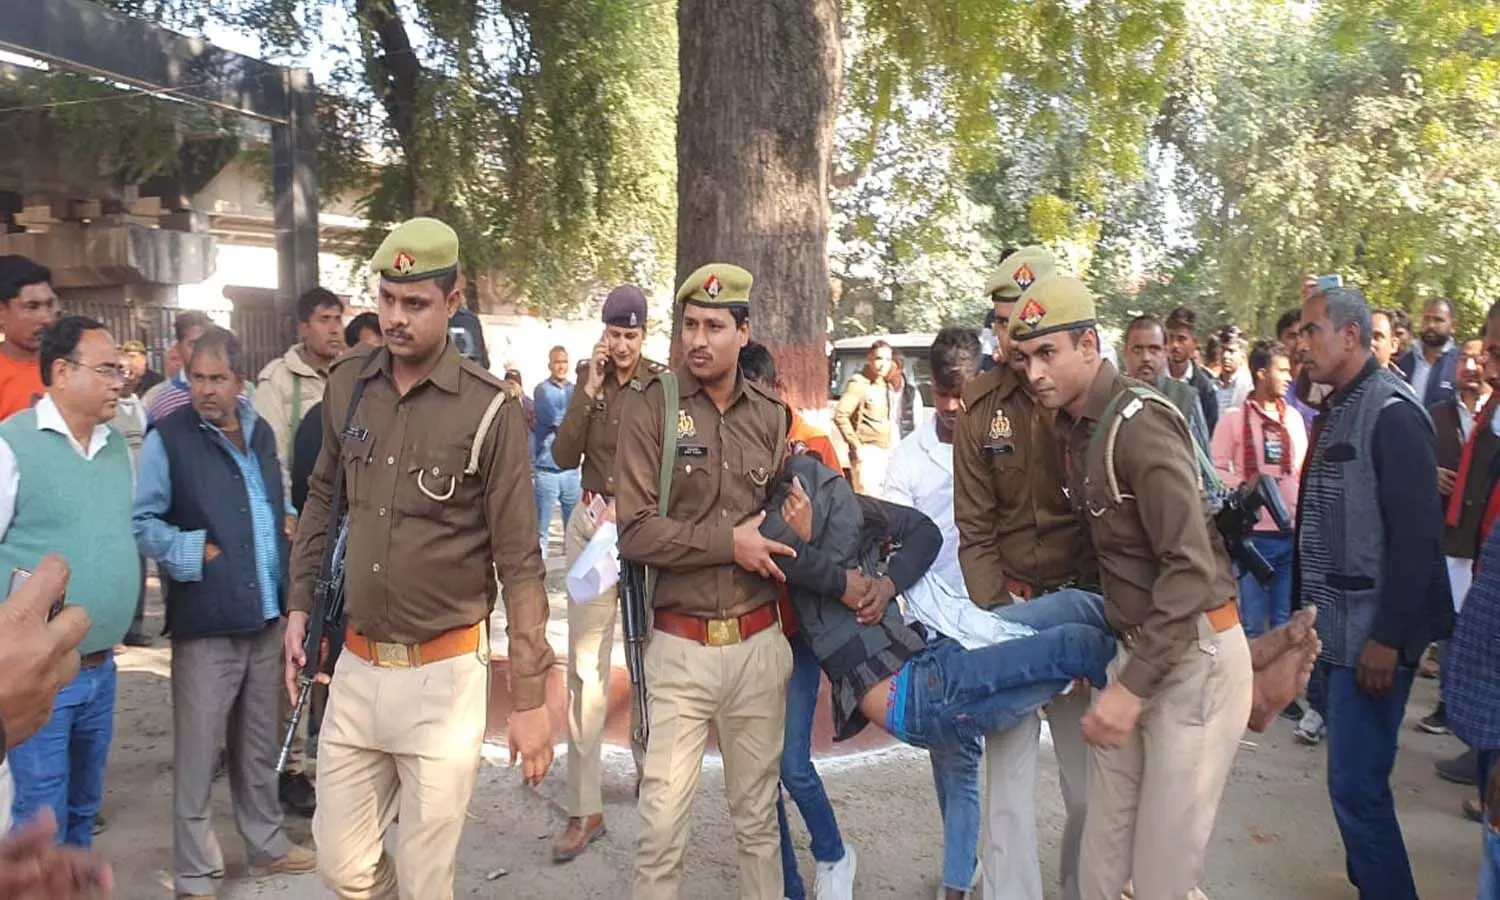 Police caught the Dalit youth who complained about illegal occupation of land in Rae Bareli